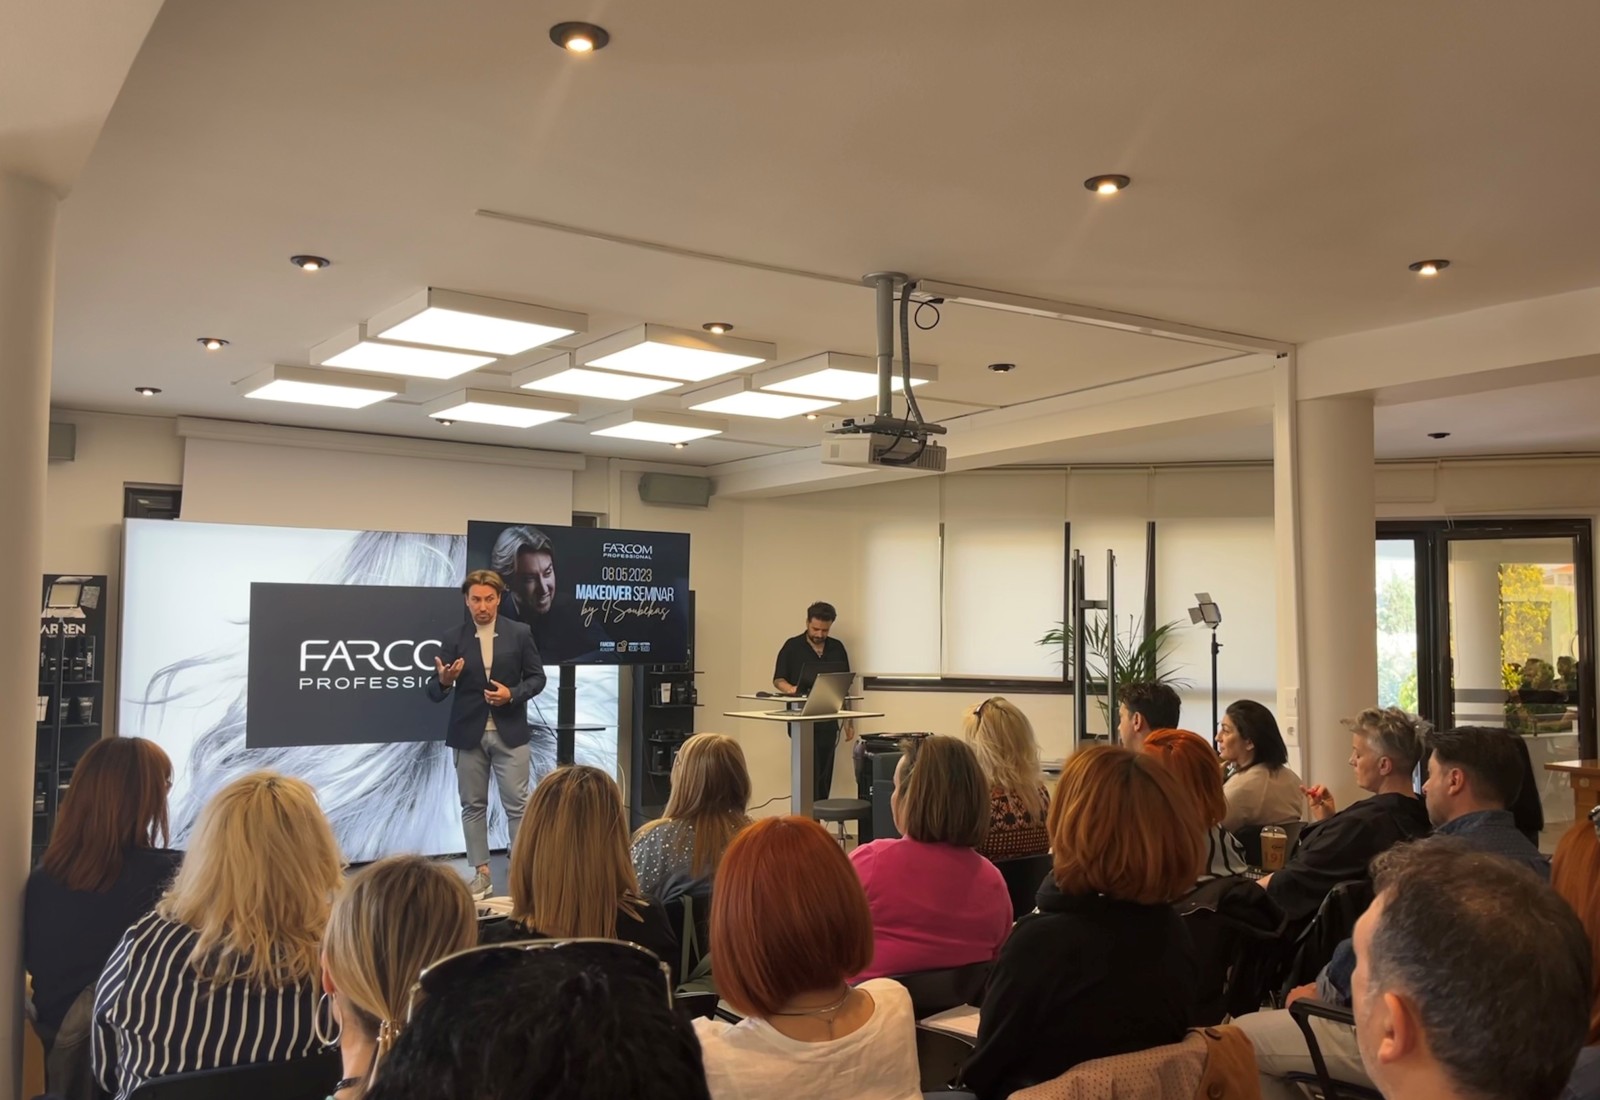 MAKEOVER SEMINAR by Hair Expert & Makeover Specialist Ioannis Soubecas